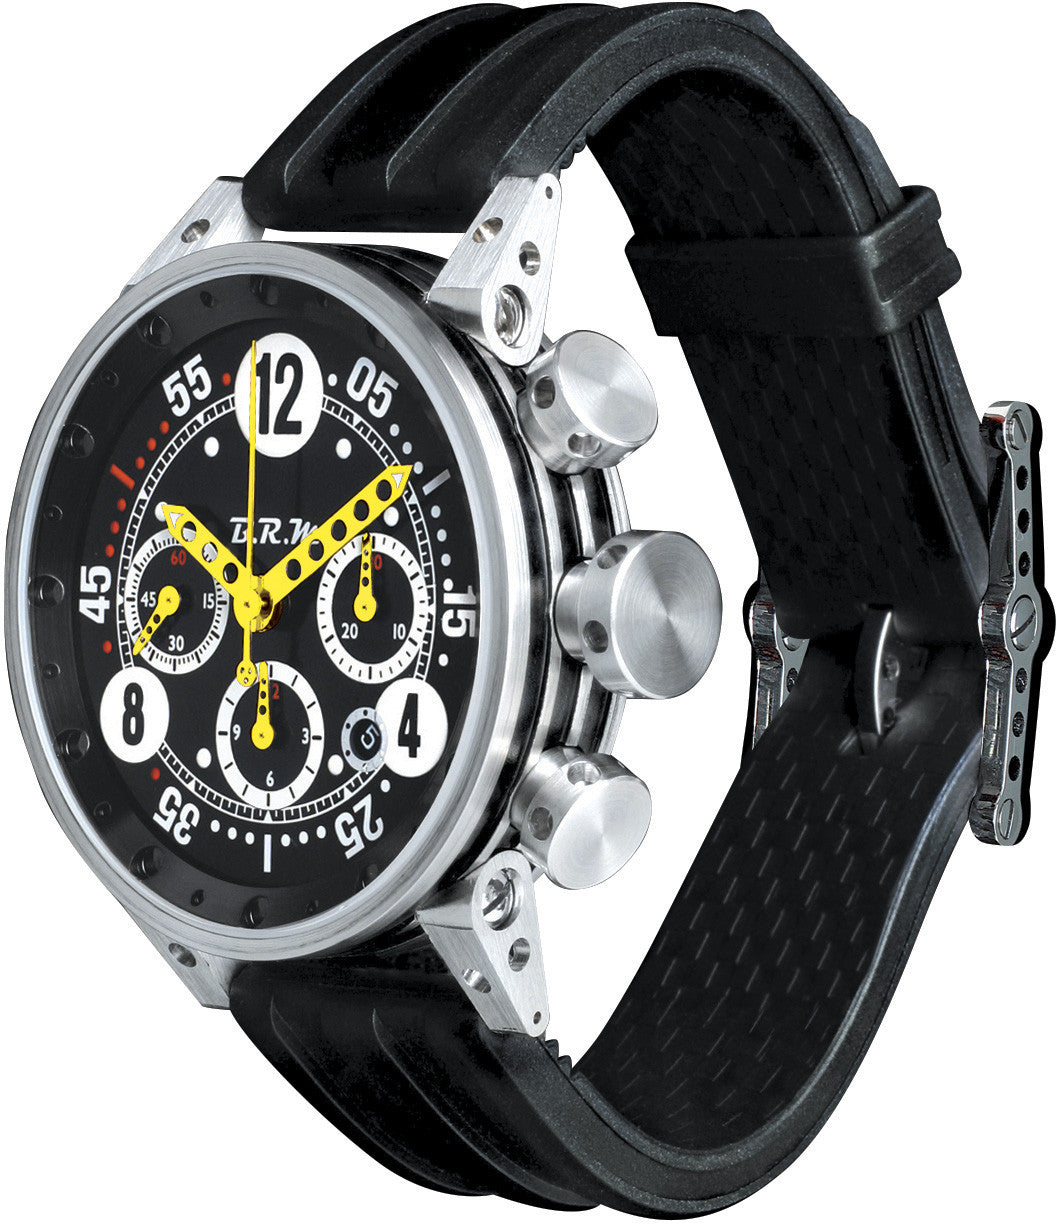 B.R.M V12-44 for Rs.447,324 for sale from a Seller on Chrono24